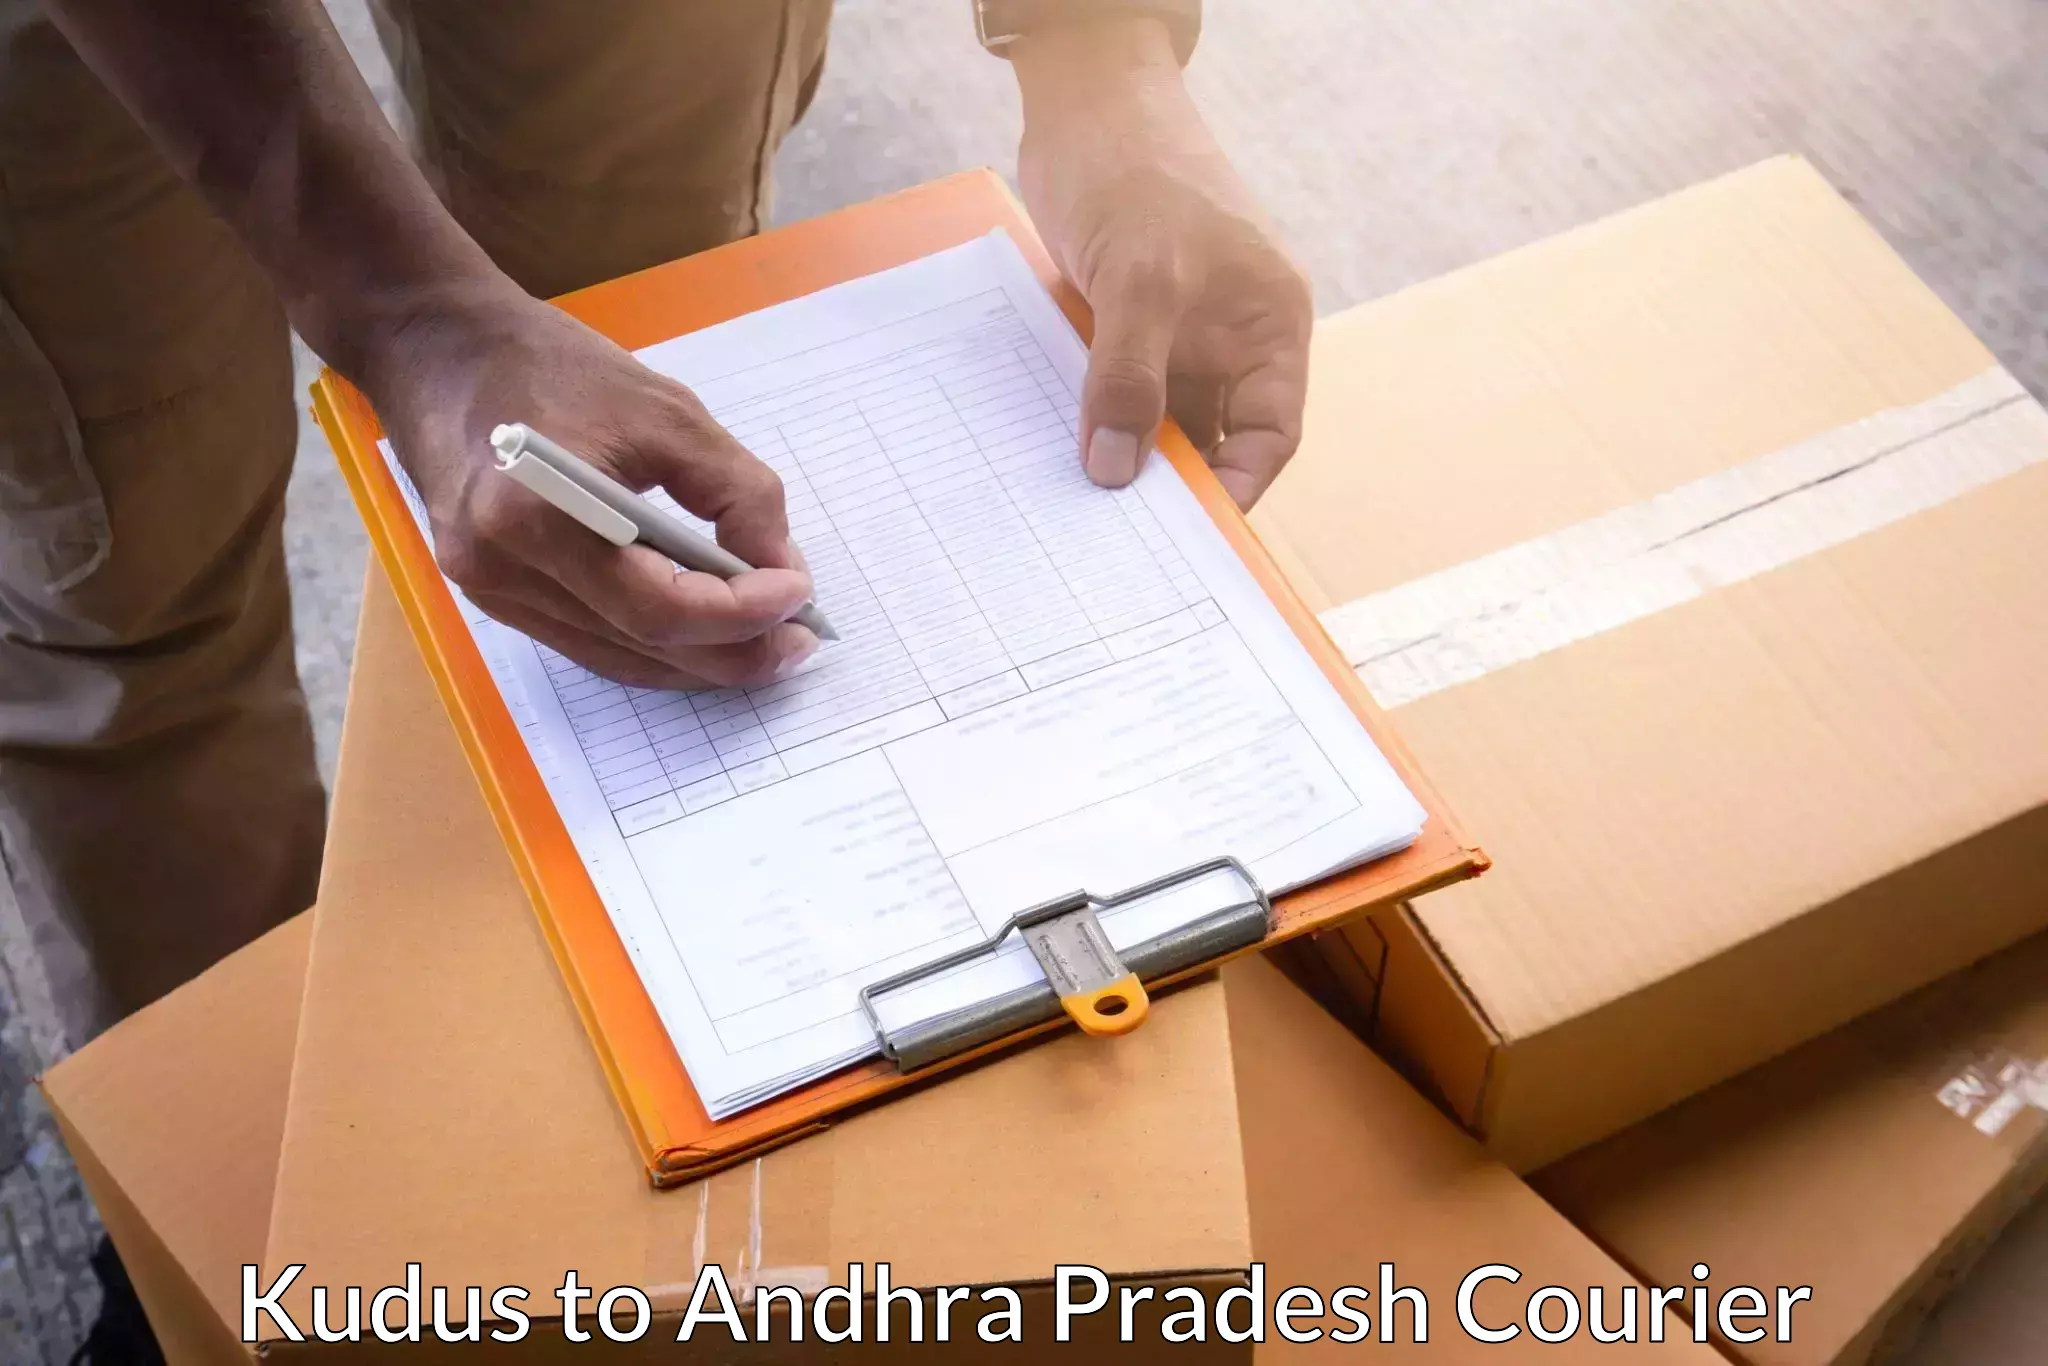 Weekend courier service in Kudus to Andhra Pradesh